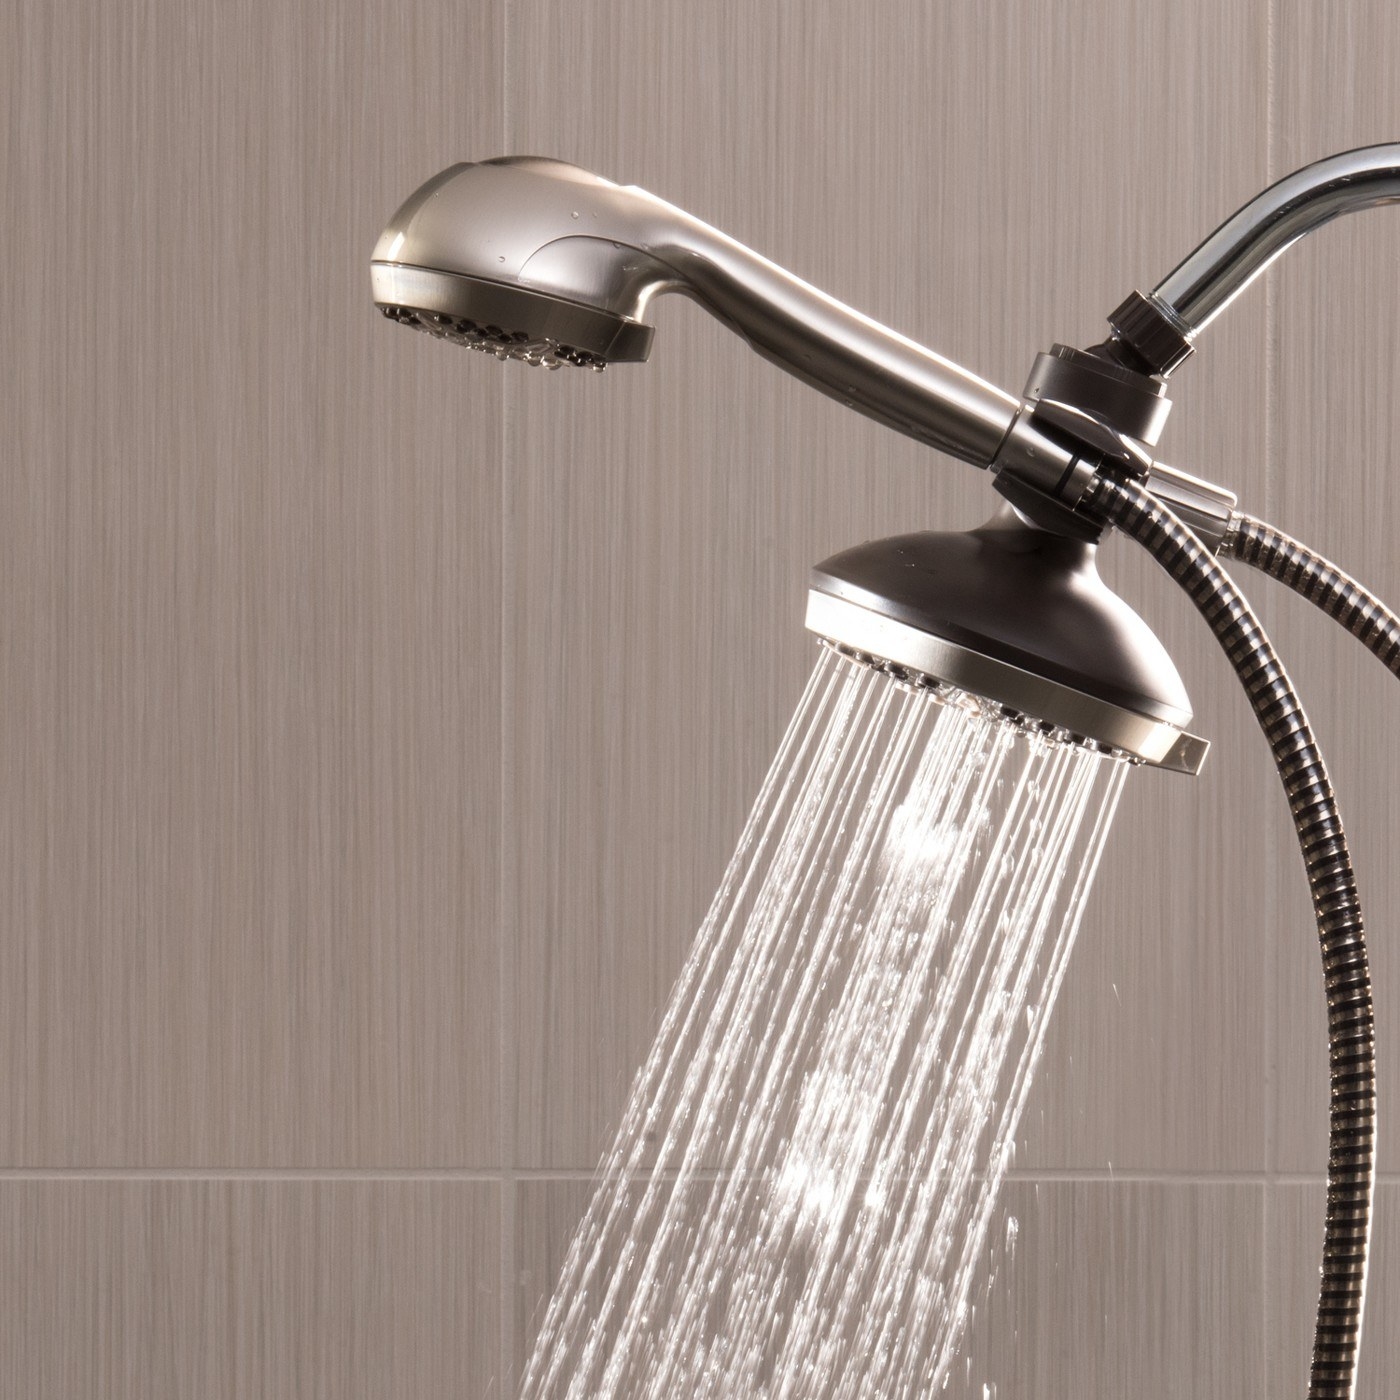 The brushed nickel dual shower head in action